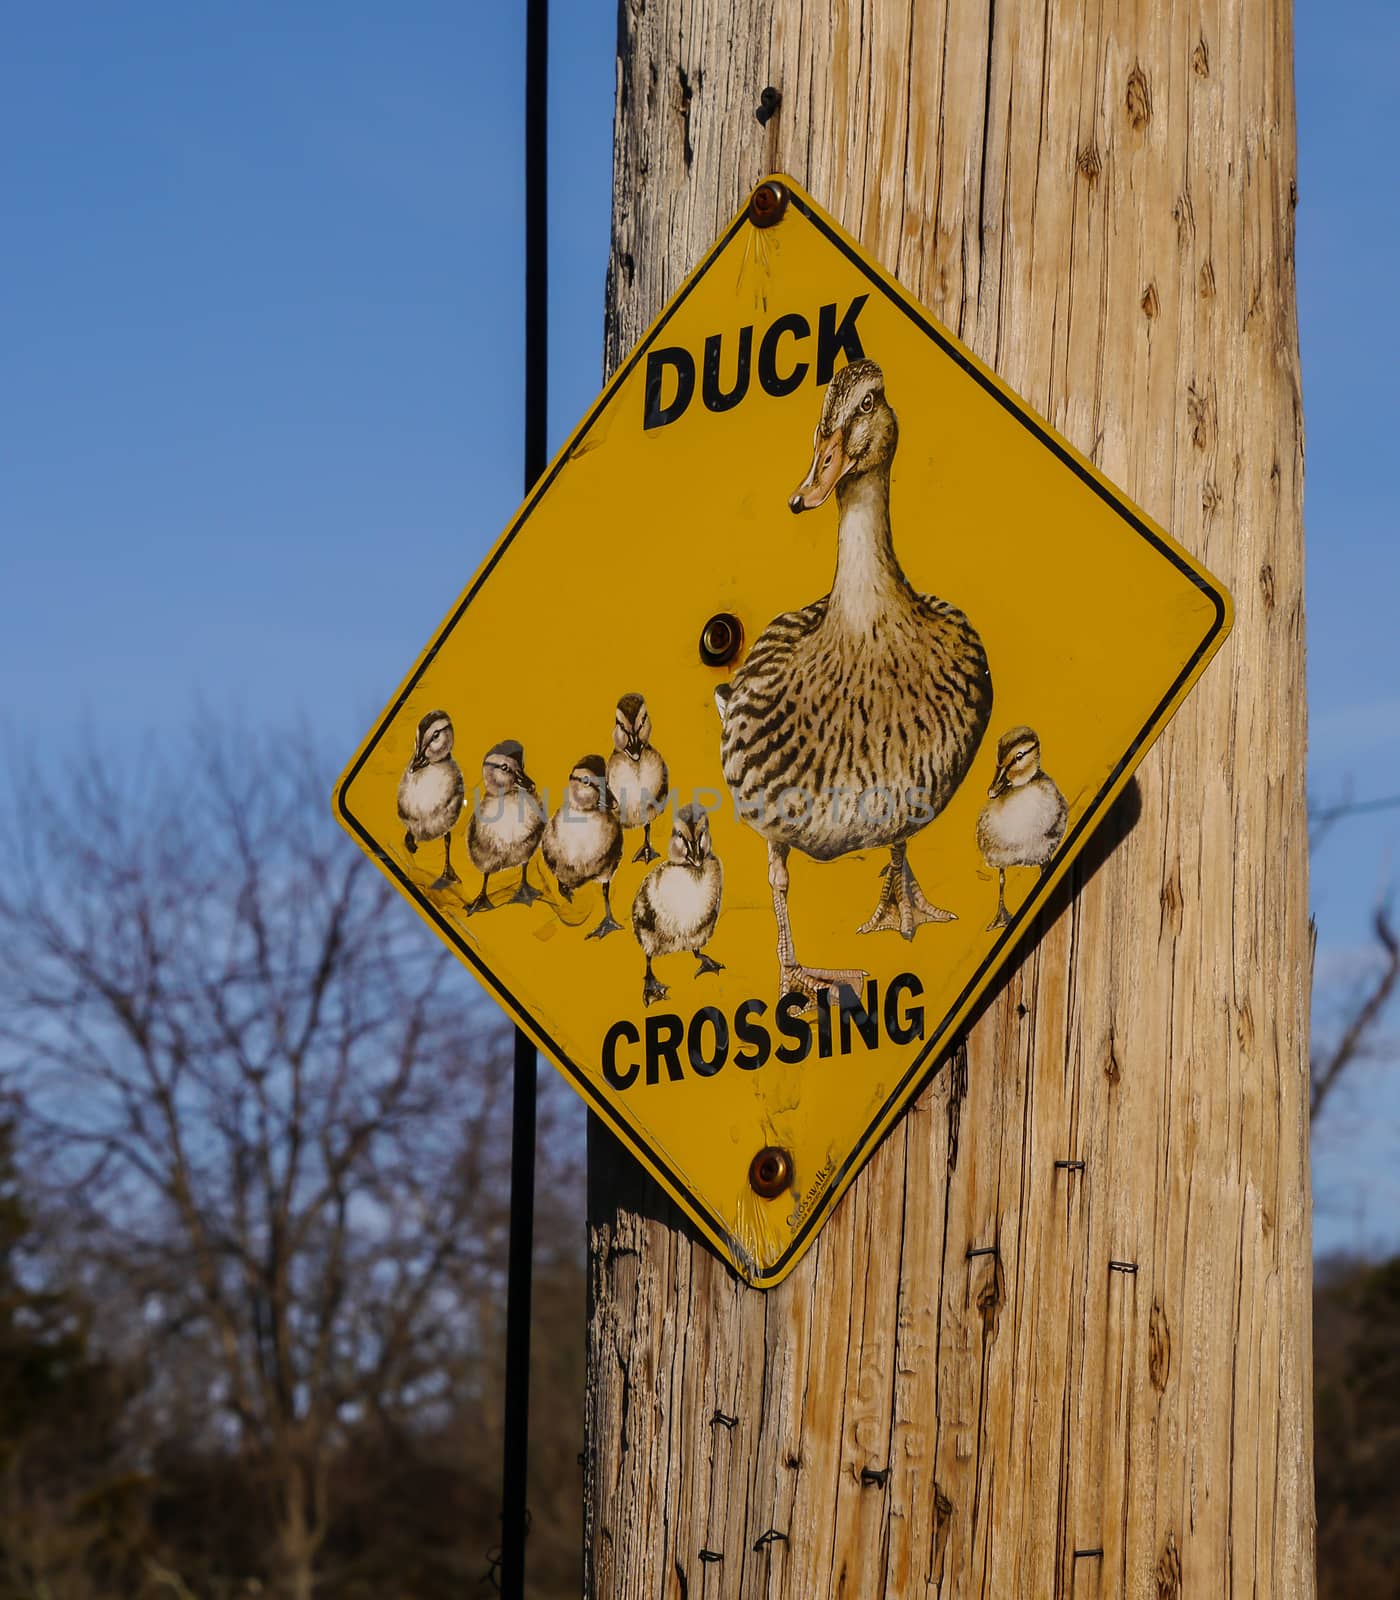 Yellow road sign with ducks